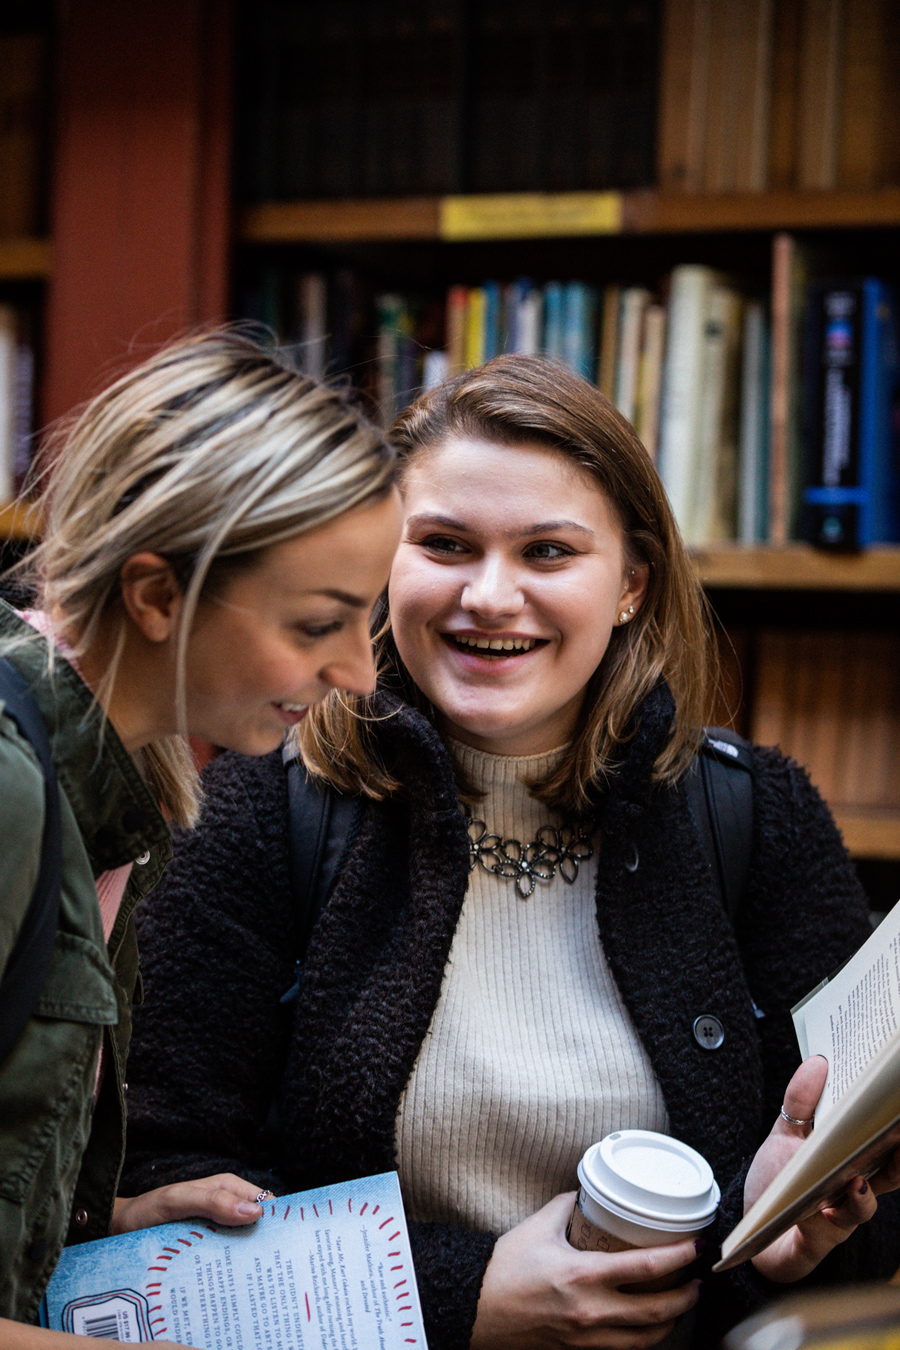 Christina Rayball sharing a book with another student at the Brattle Book Shop on West Street.